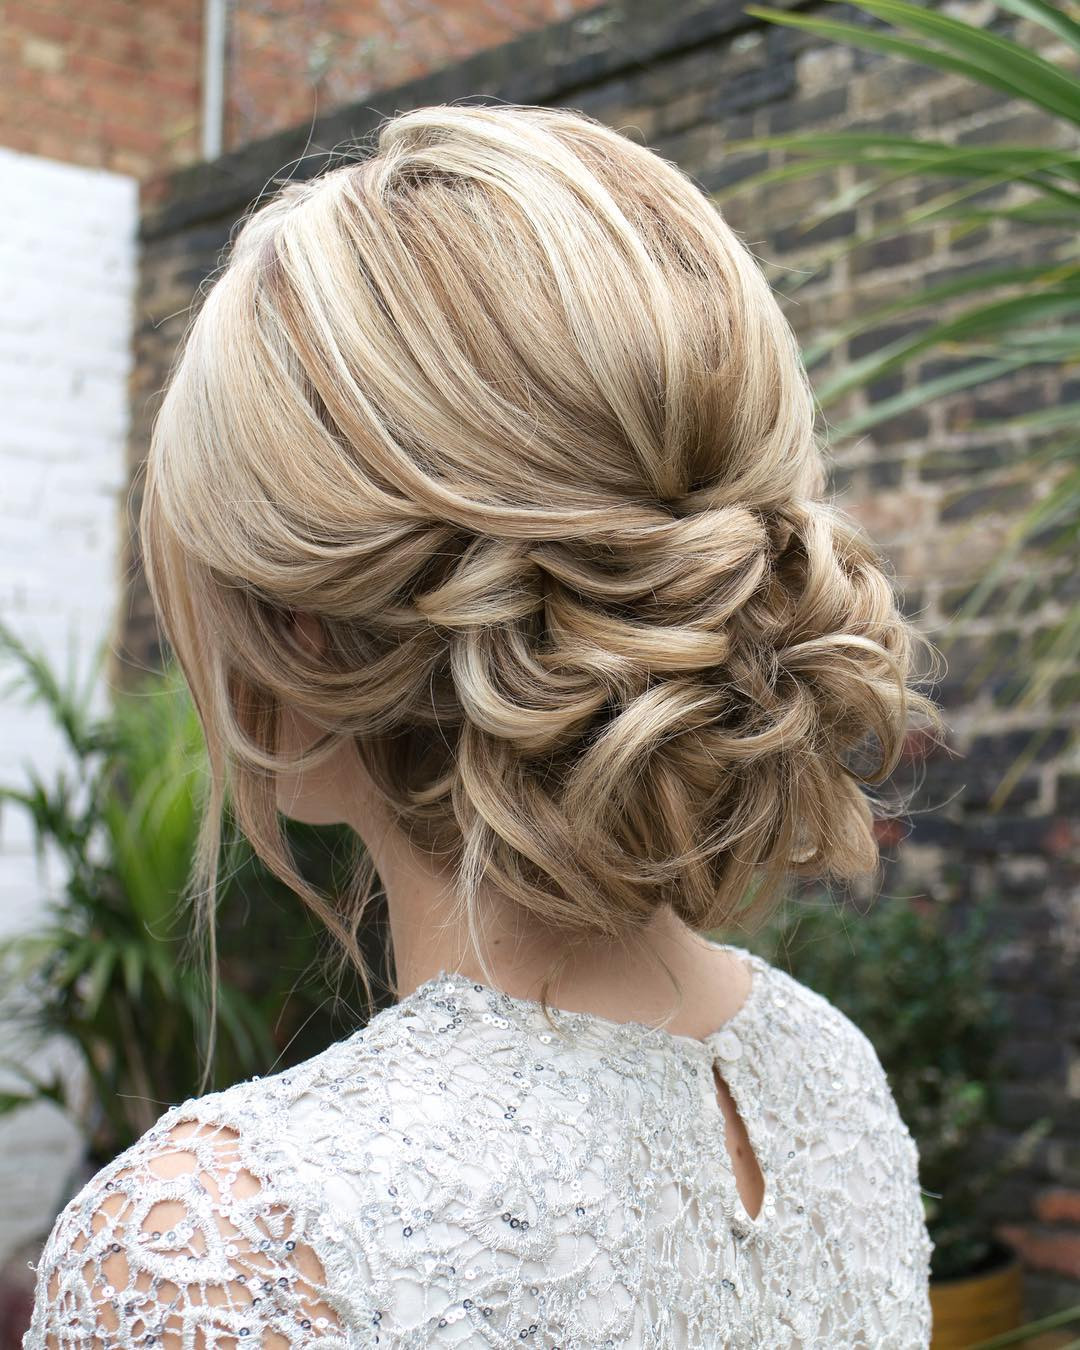 Prom Hairstyles Updos
 10 Gorgeous Prom Updos for Long Hair Prom Updo Hairstyles